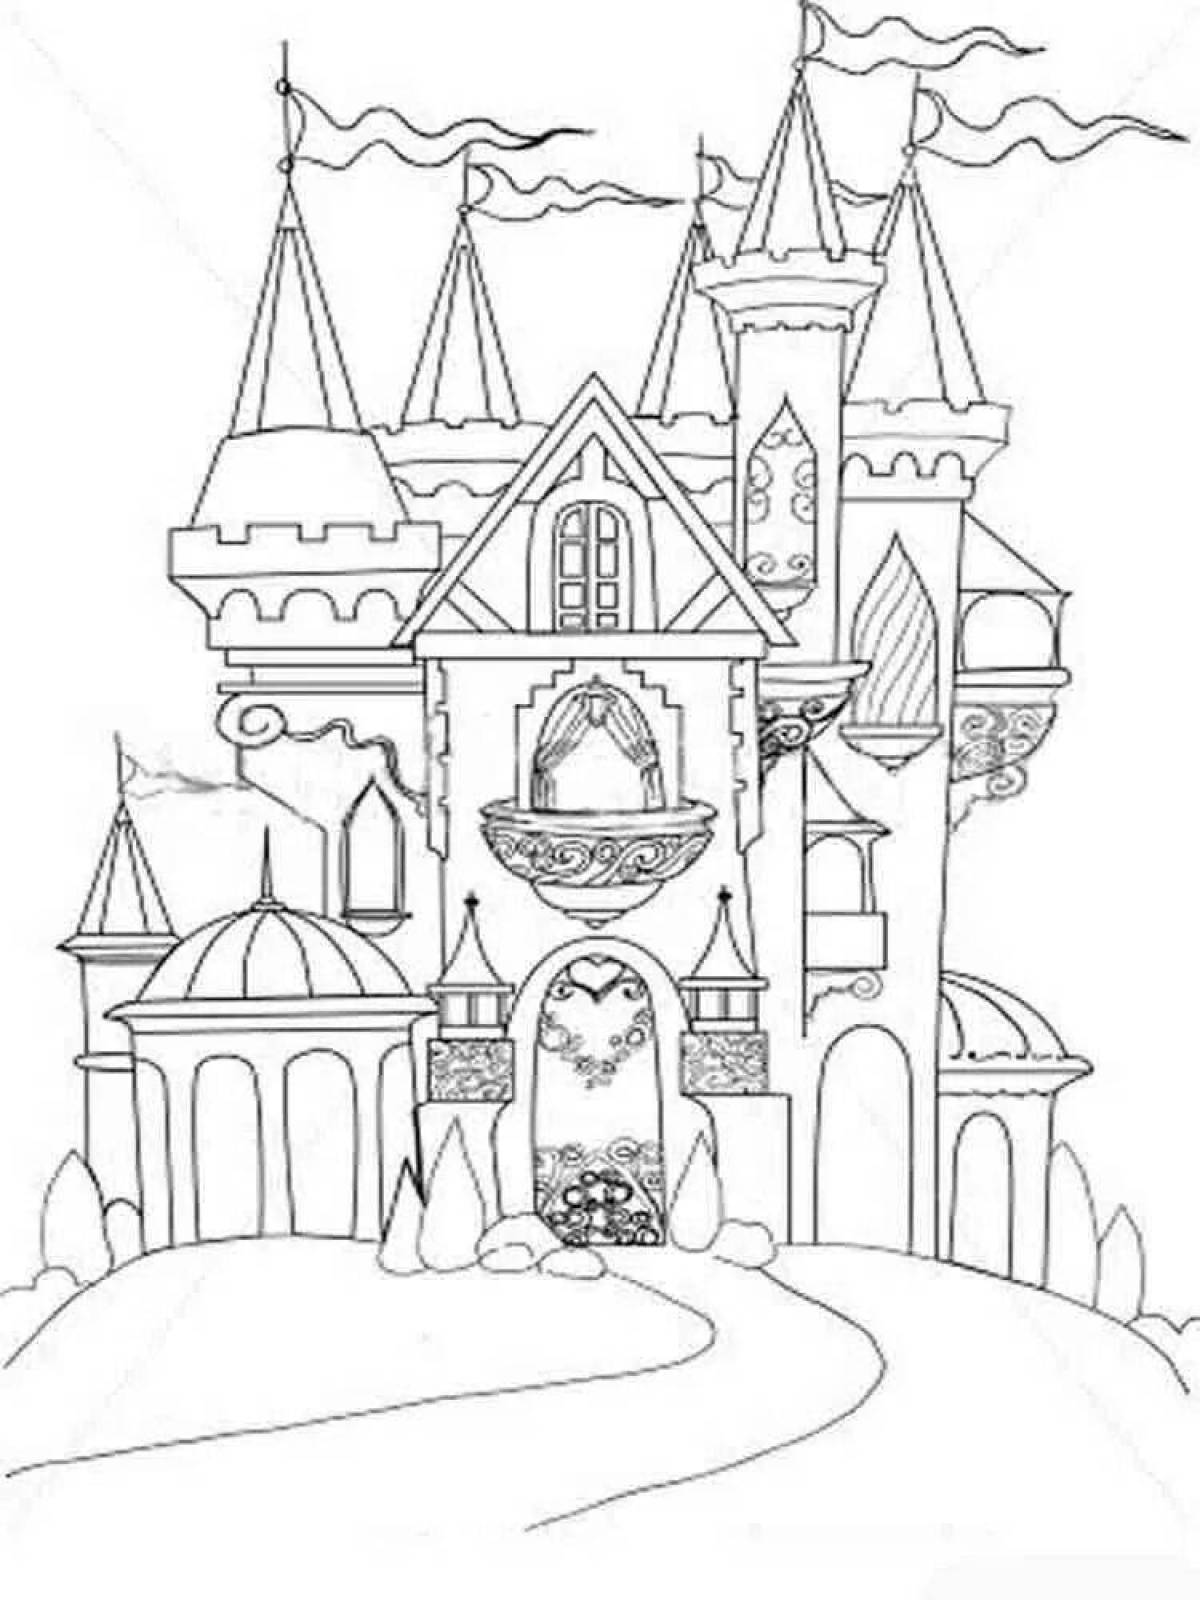 Shining fairytale palace coloring book